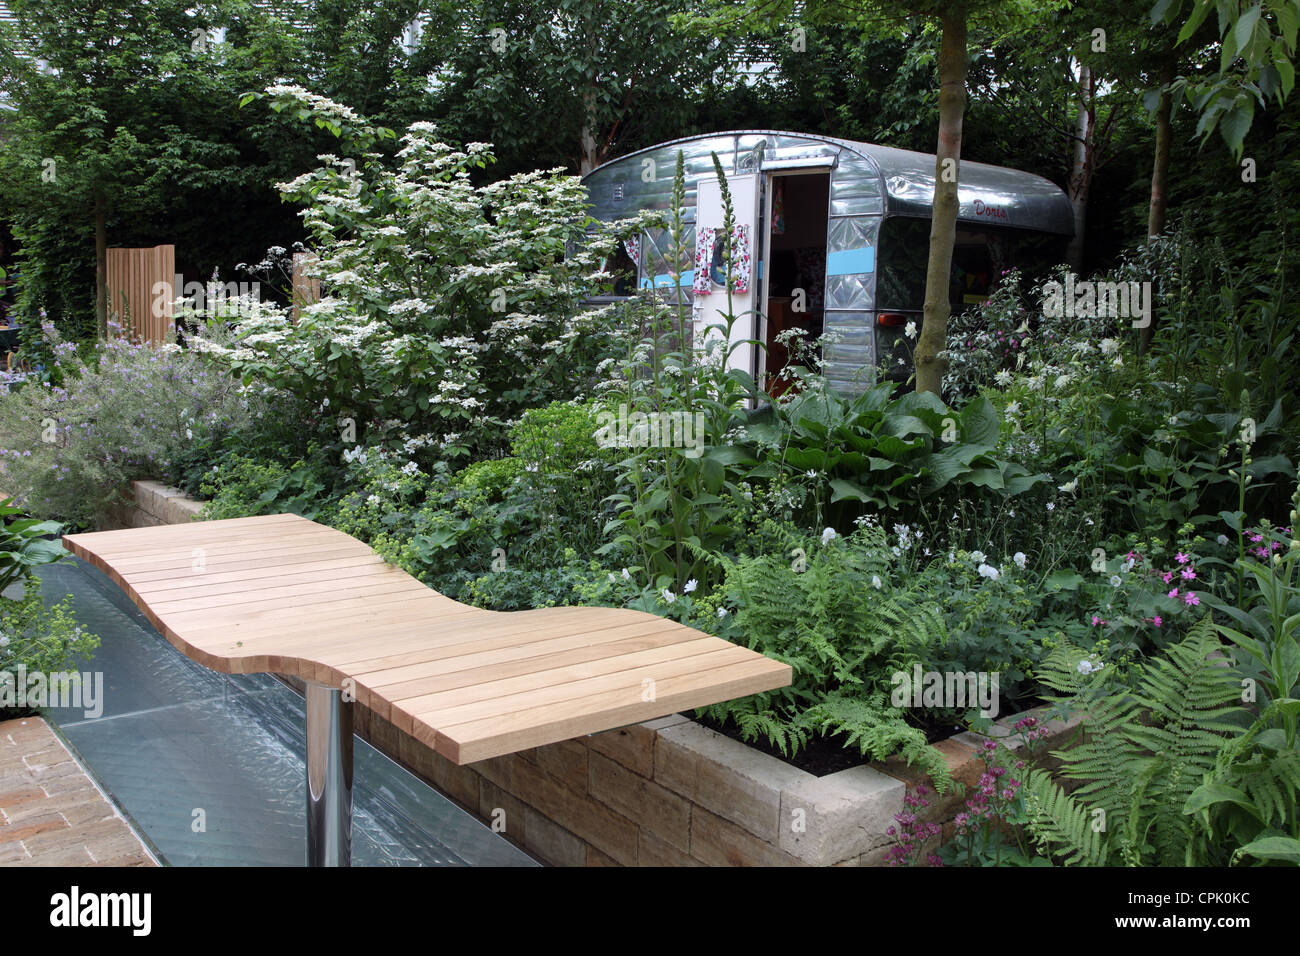 A Celebration of Caravanning, Show Garden at the Chelsea Flower Show 2012 by Jo Thompson Stock Photo